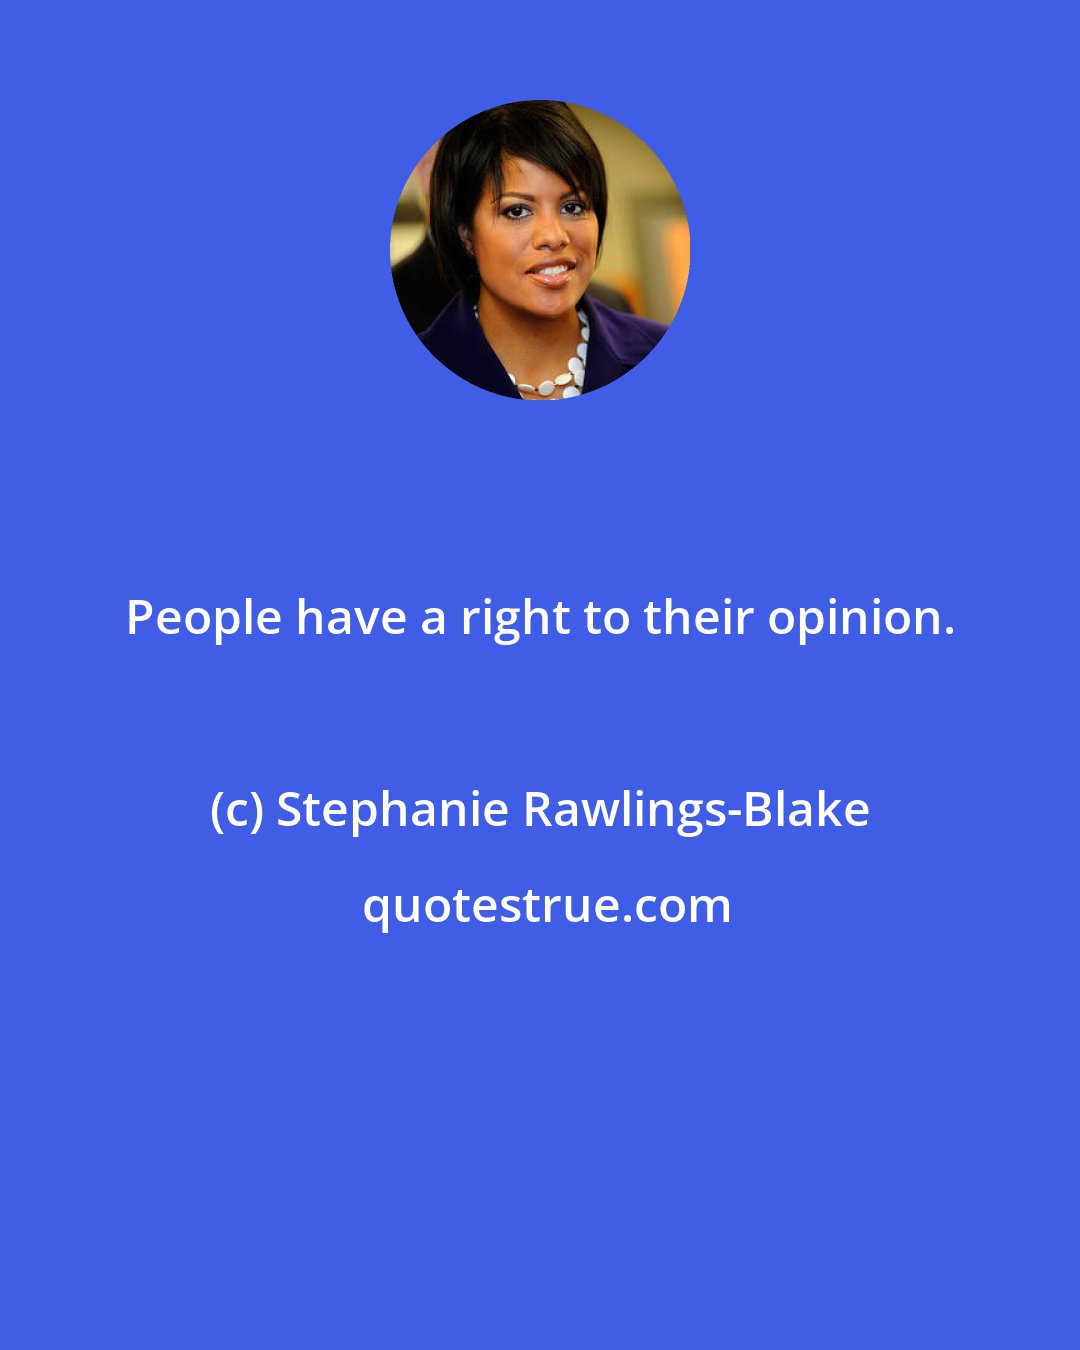 Stephanie Rawlings-Blake: People have a right to their opinion.